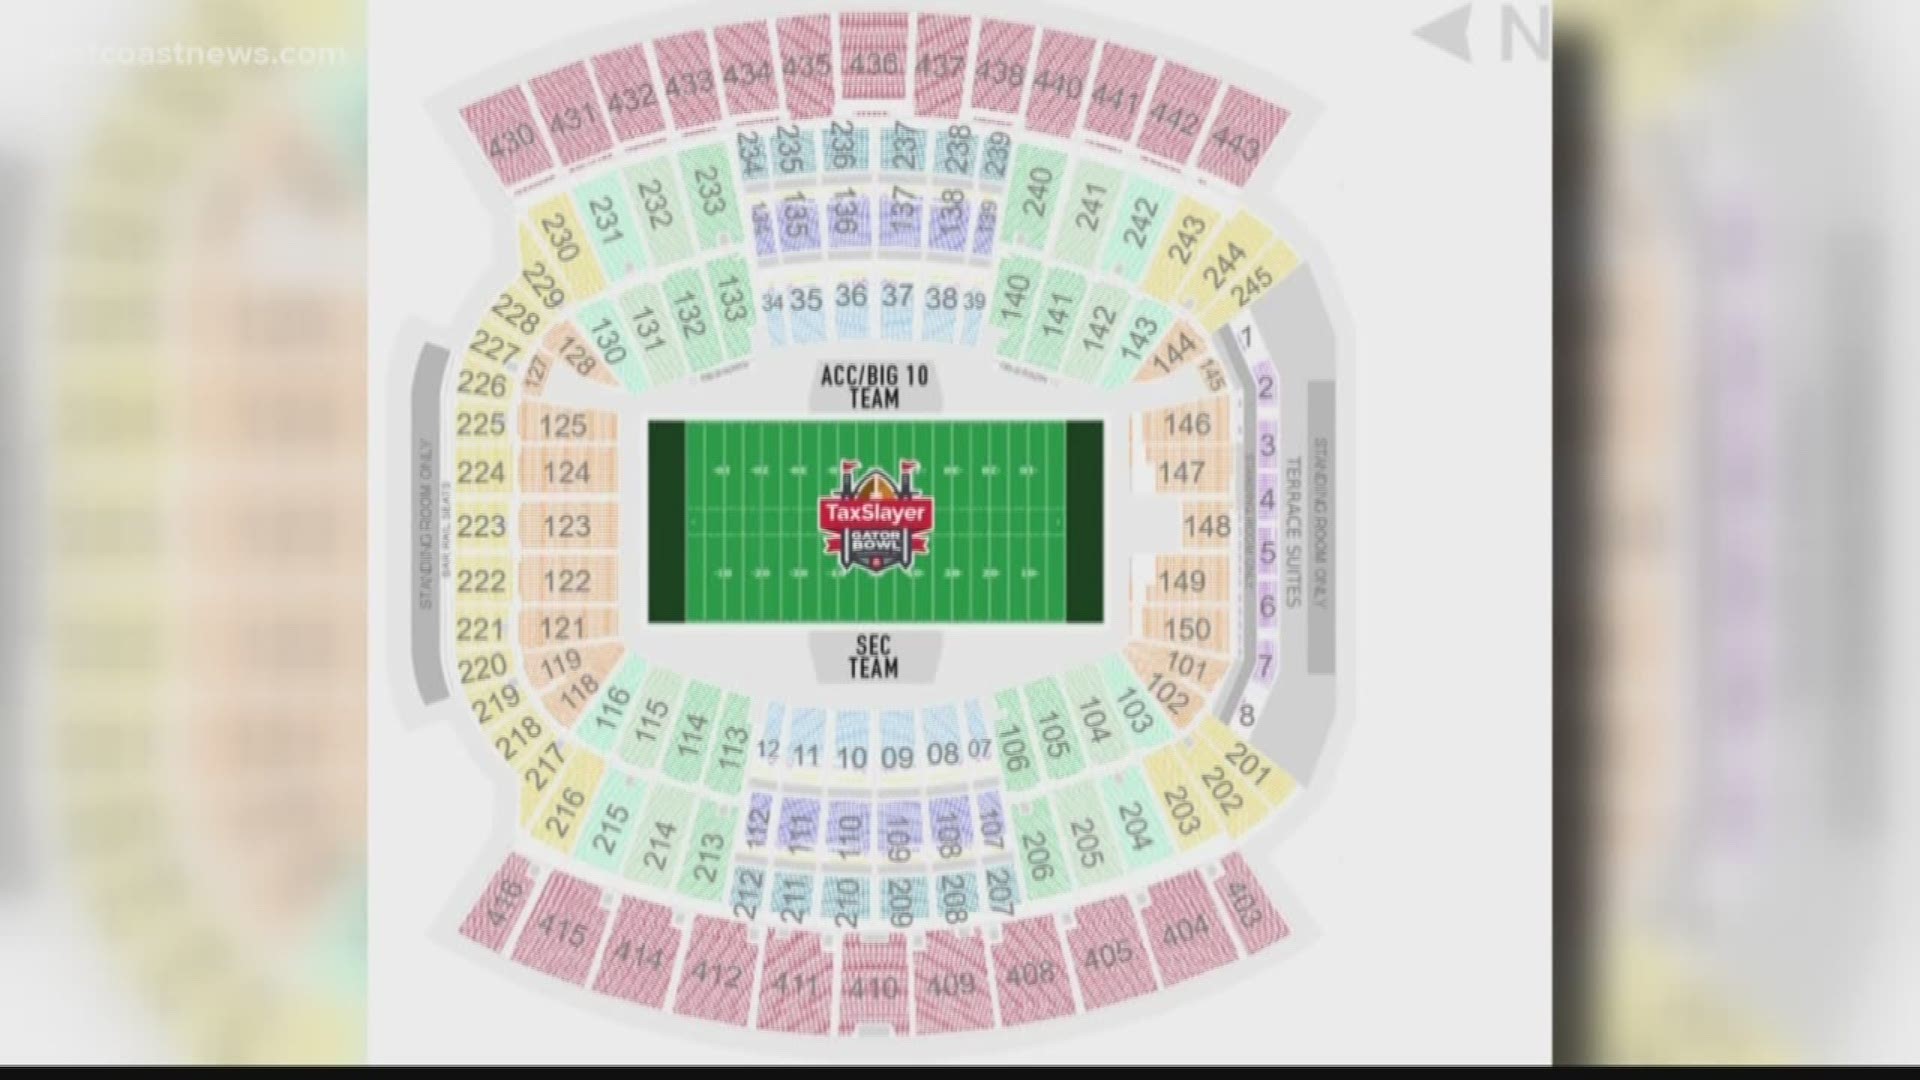 The City was contracted to install 2,000 extra seats for the Gator Bowl, but couldn't due to a quick turn around from the previous Jaguars game.